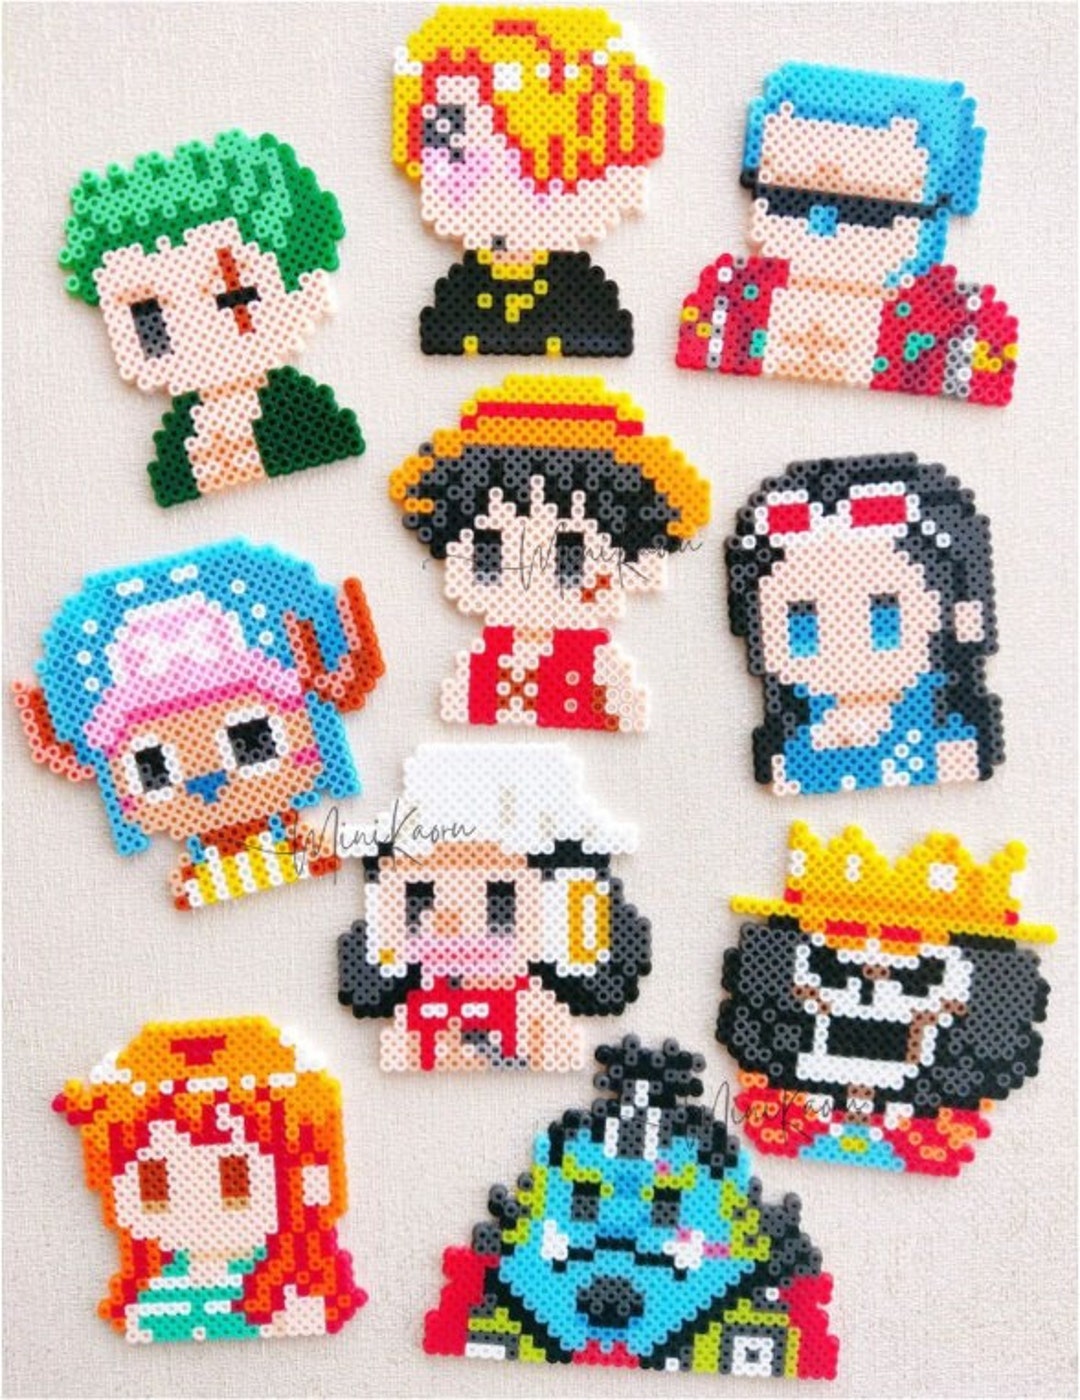 Crafts & Hobbies - Kid's Crafts - Beads - Perler Beads - Page 1 - Colorful  Impressions